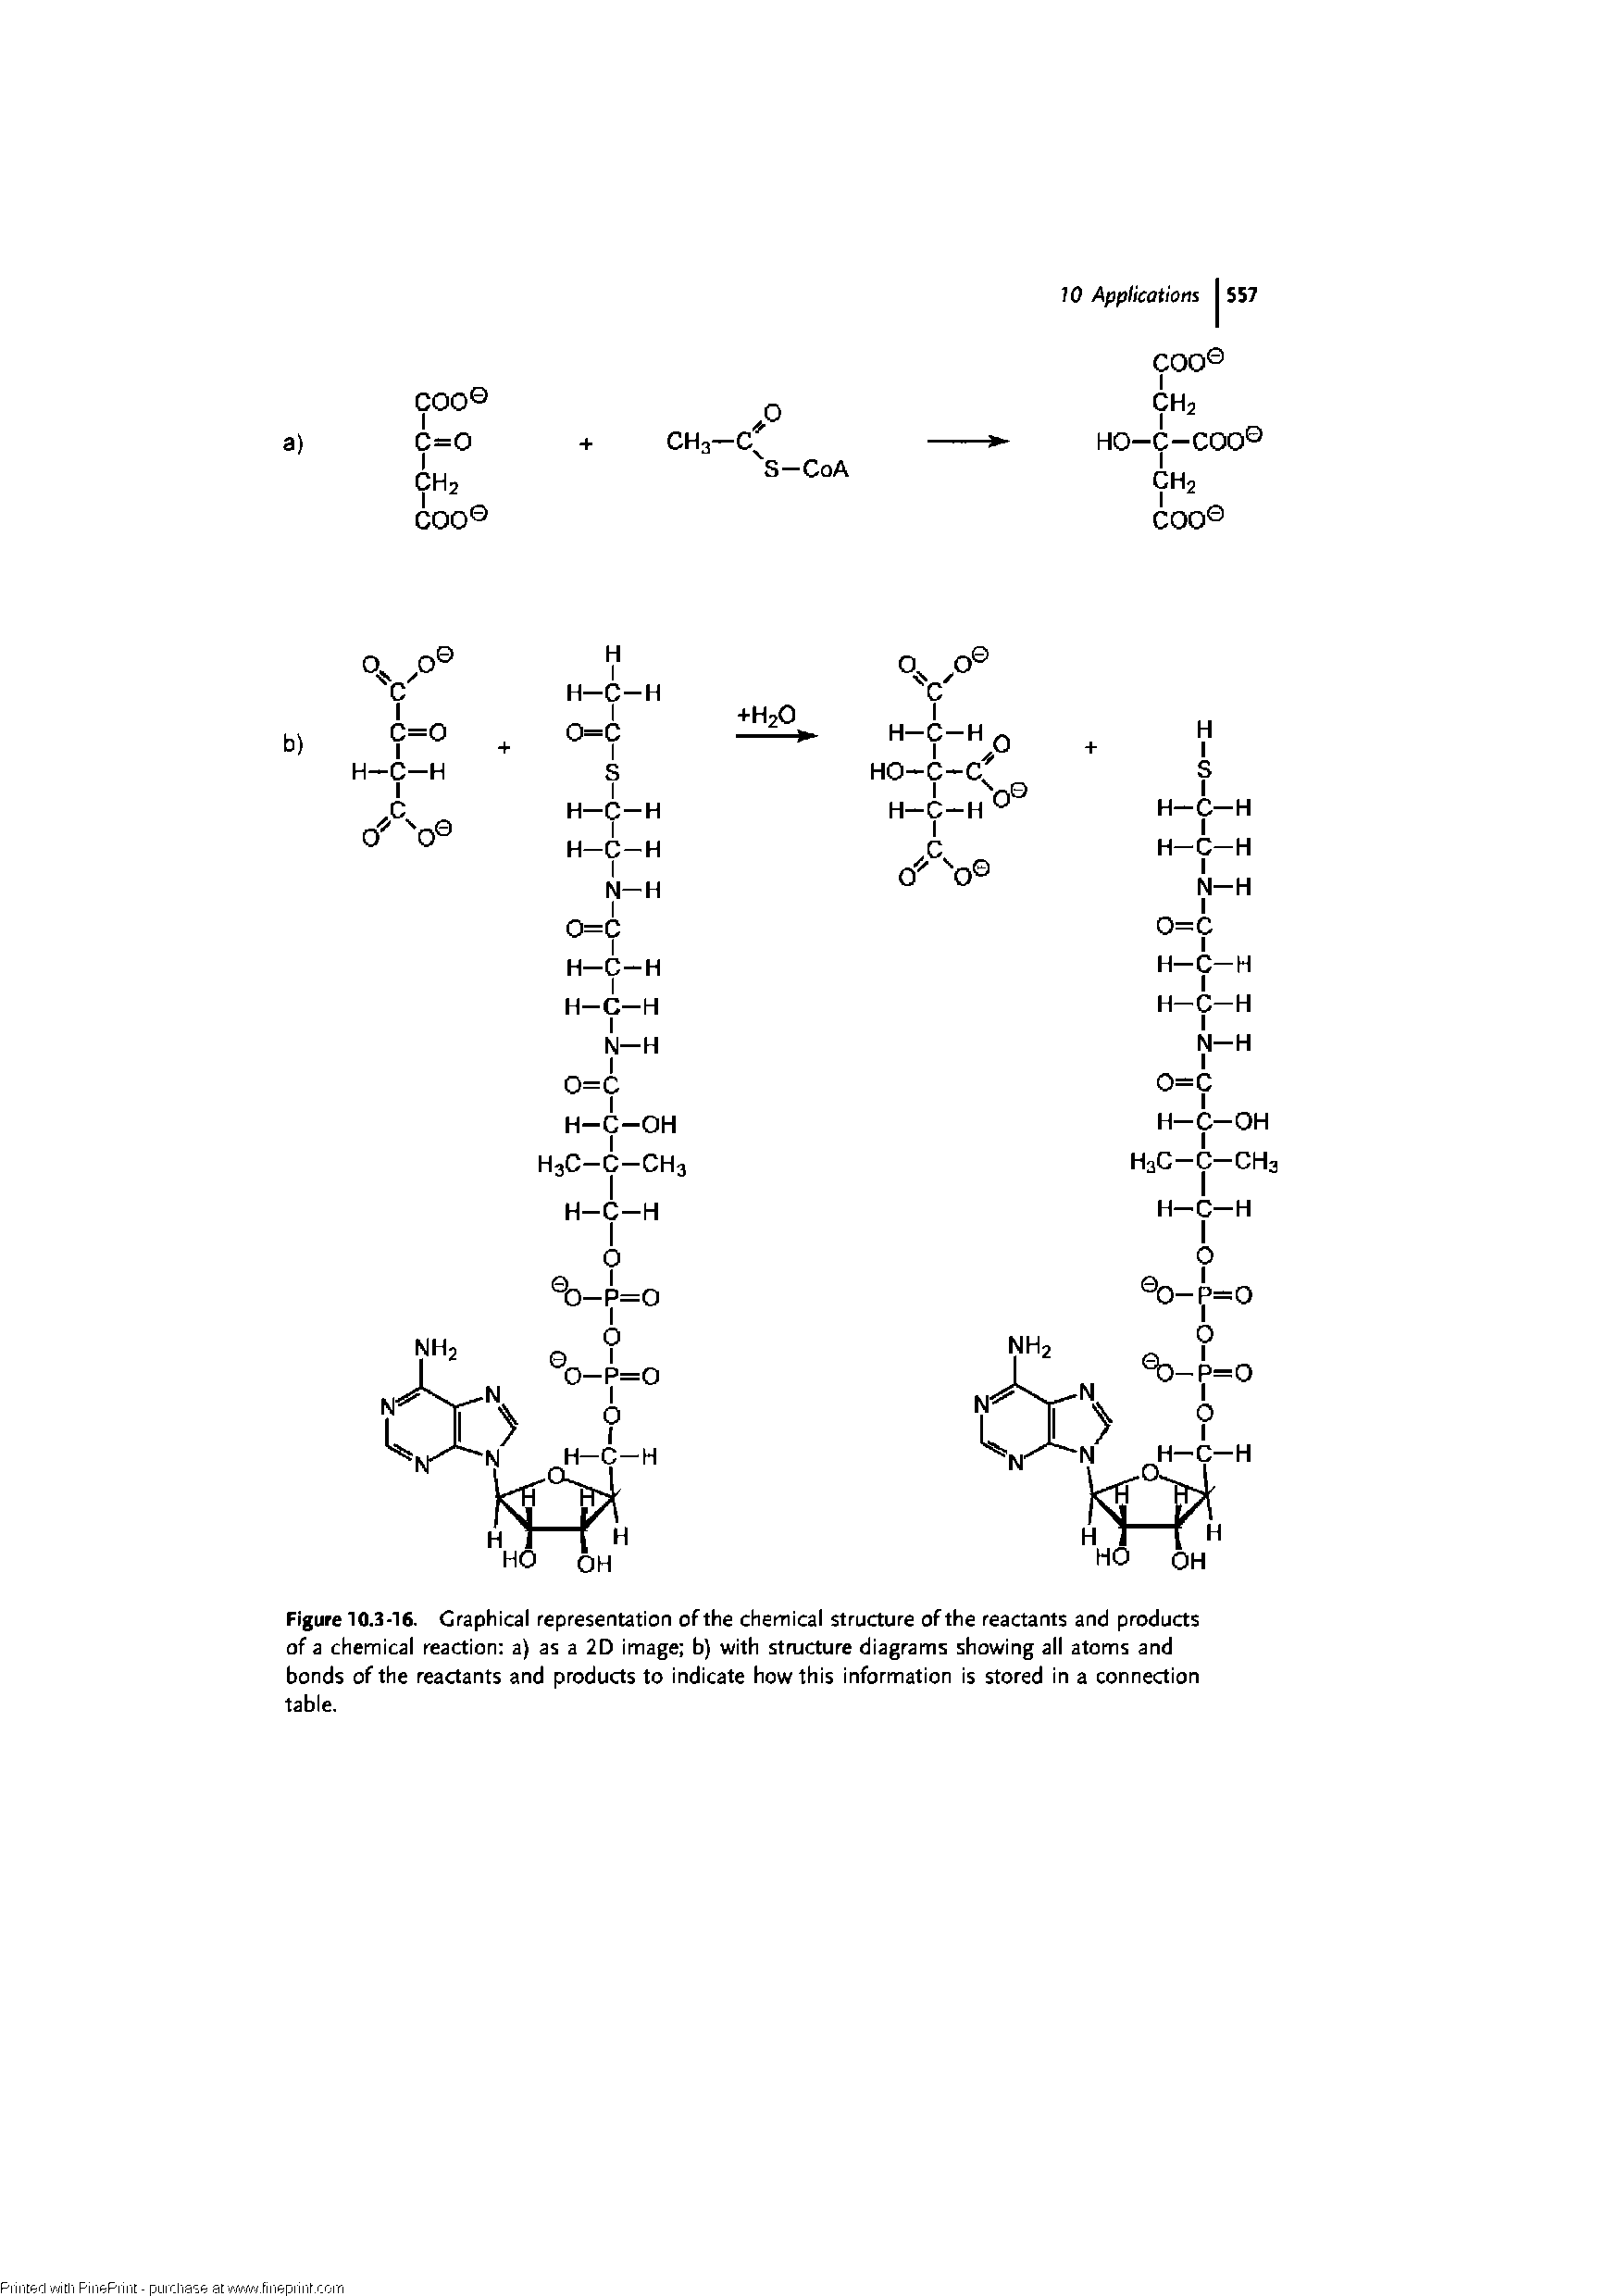 Figure 10.3-16. Graphical representation of the chemical structure of the reactants and products of a chemical reaction a) as a 2D image b) with structure diagrams showing all atoms and bonds of the reactants and products to indicate how this information is stored in a connection table.